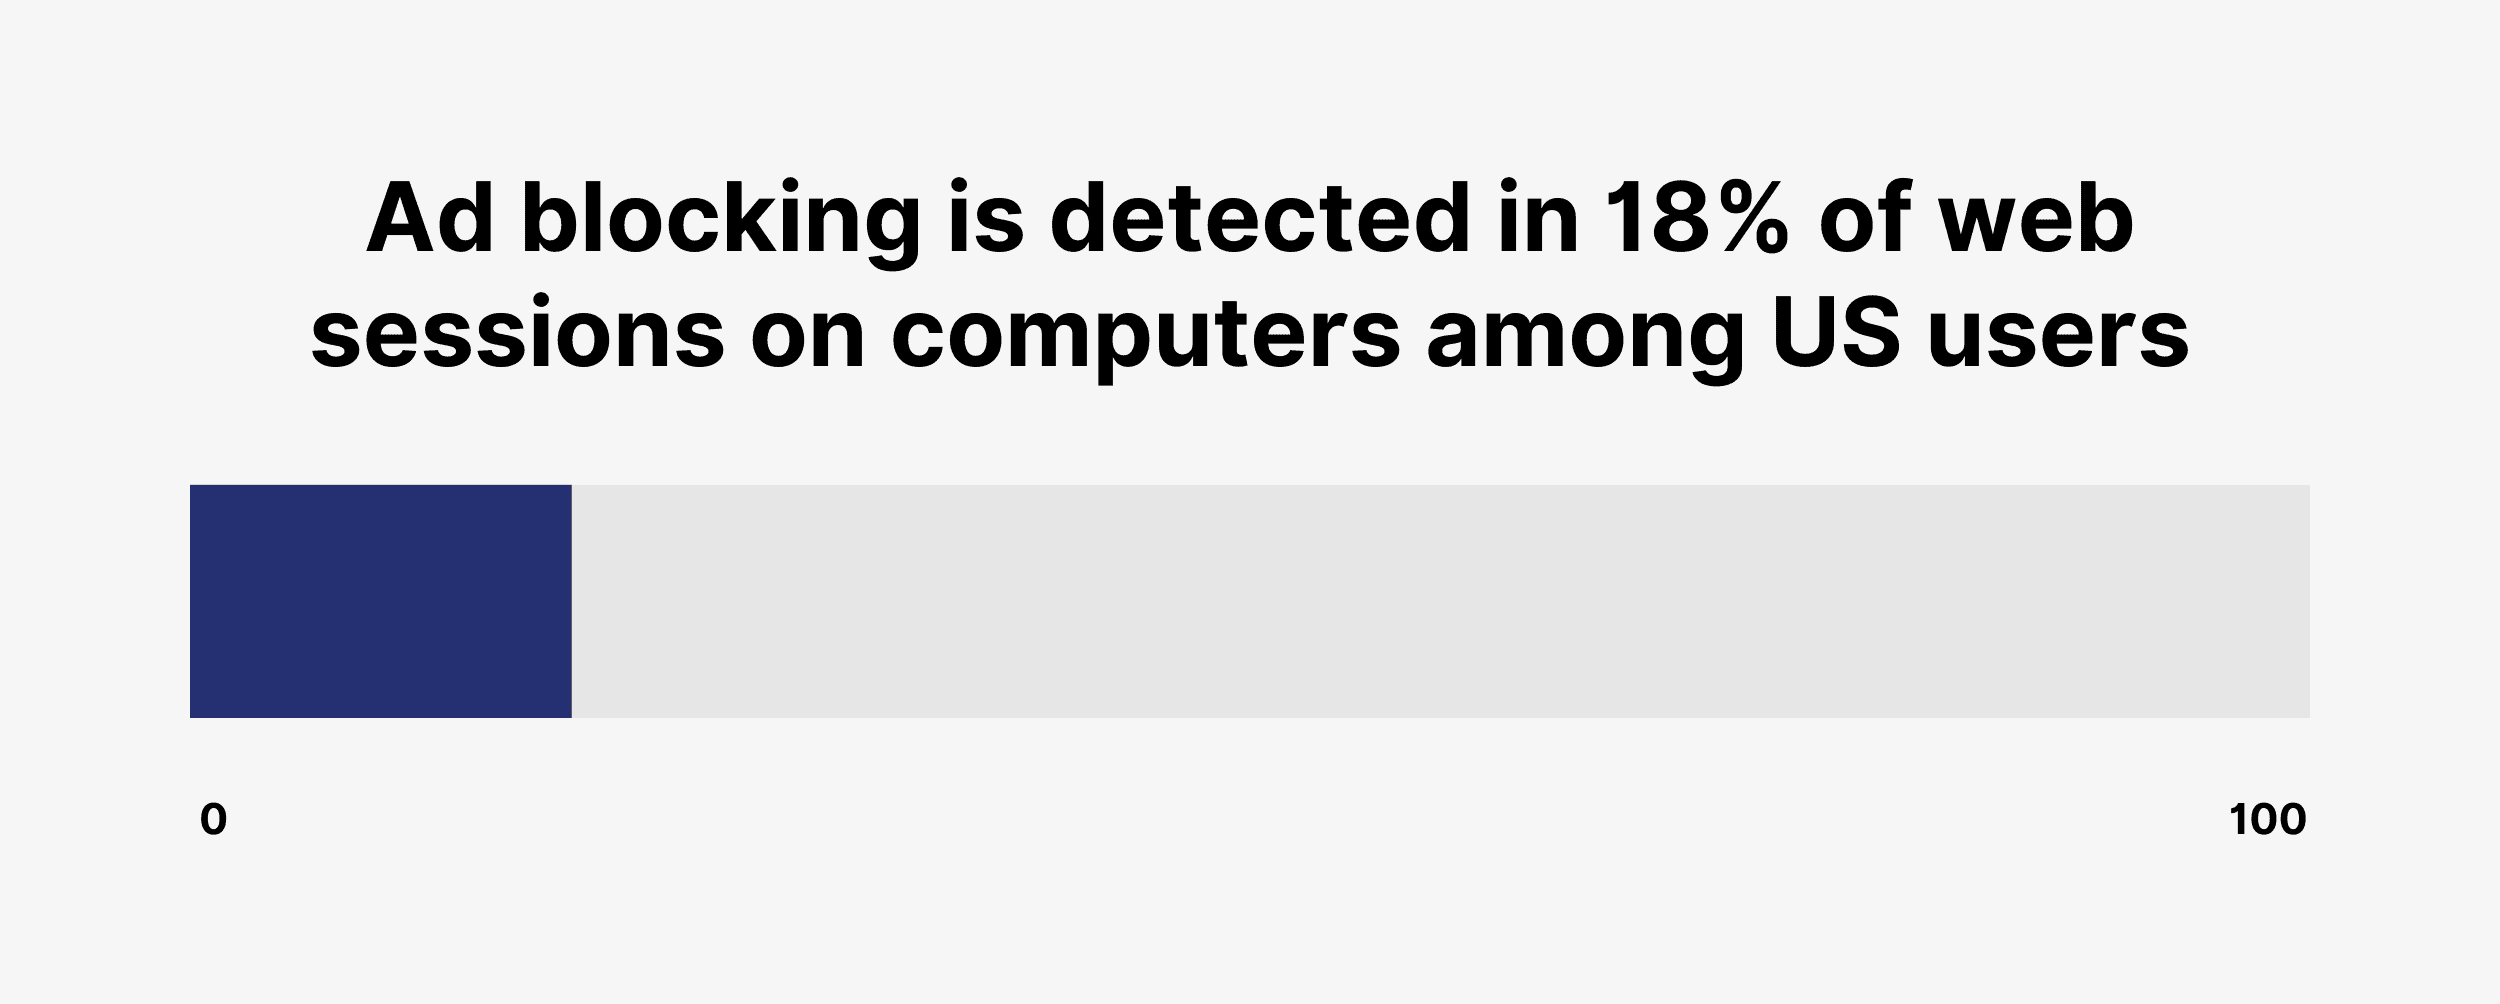 Ad blocking is detected in 18% of web sessions on computers among US users